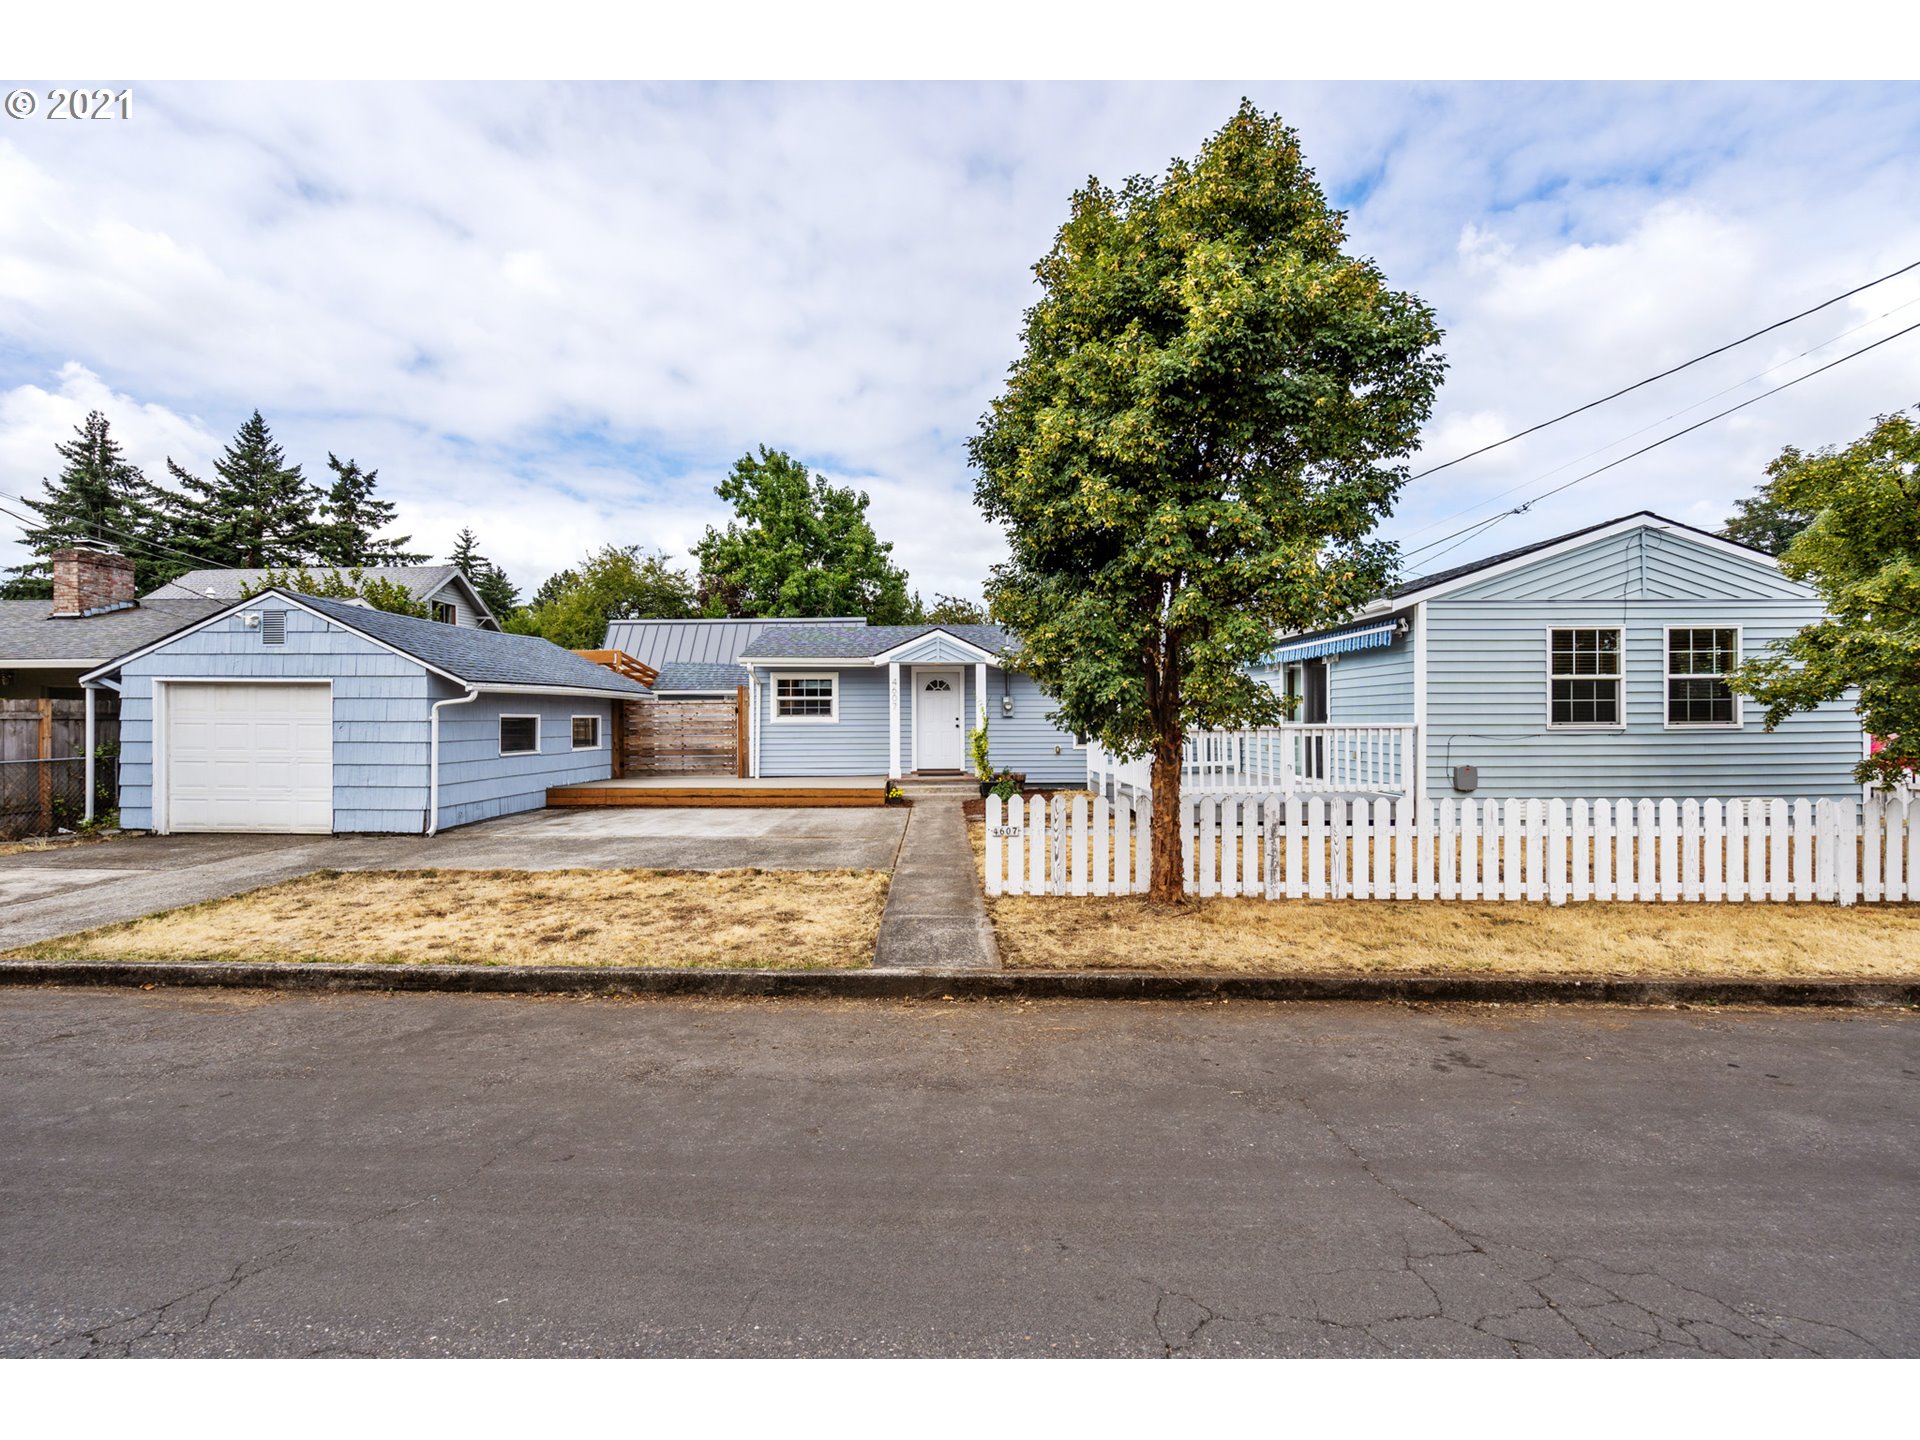 4607 SE 53RD AVE (1 of 32)